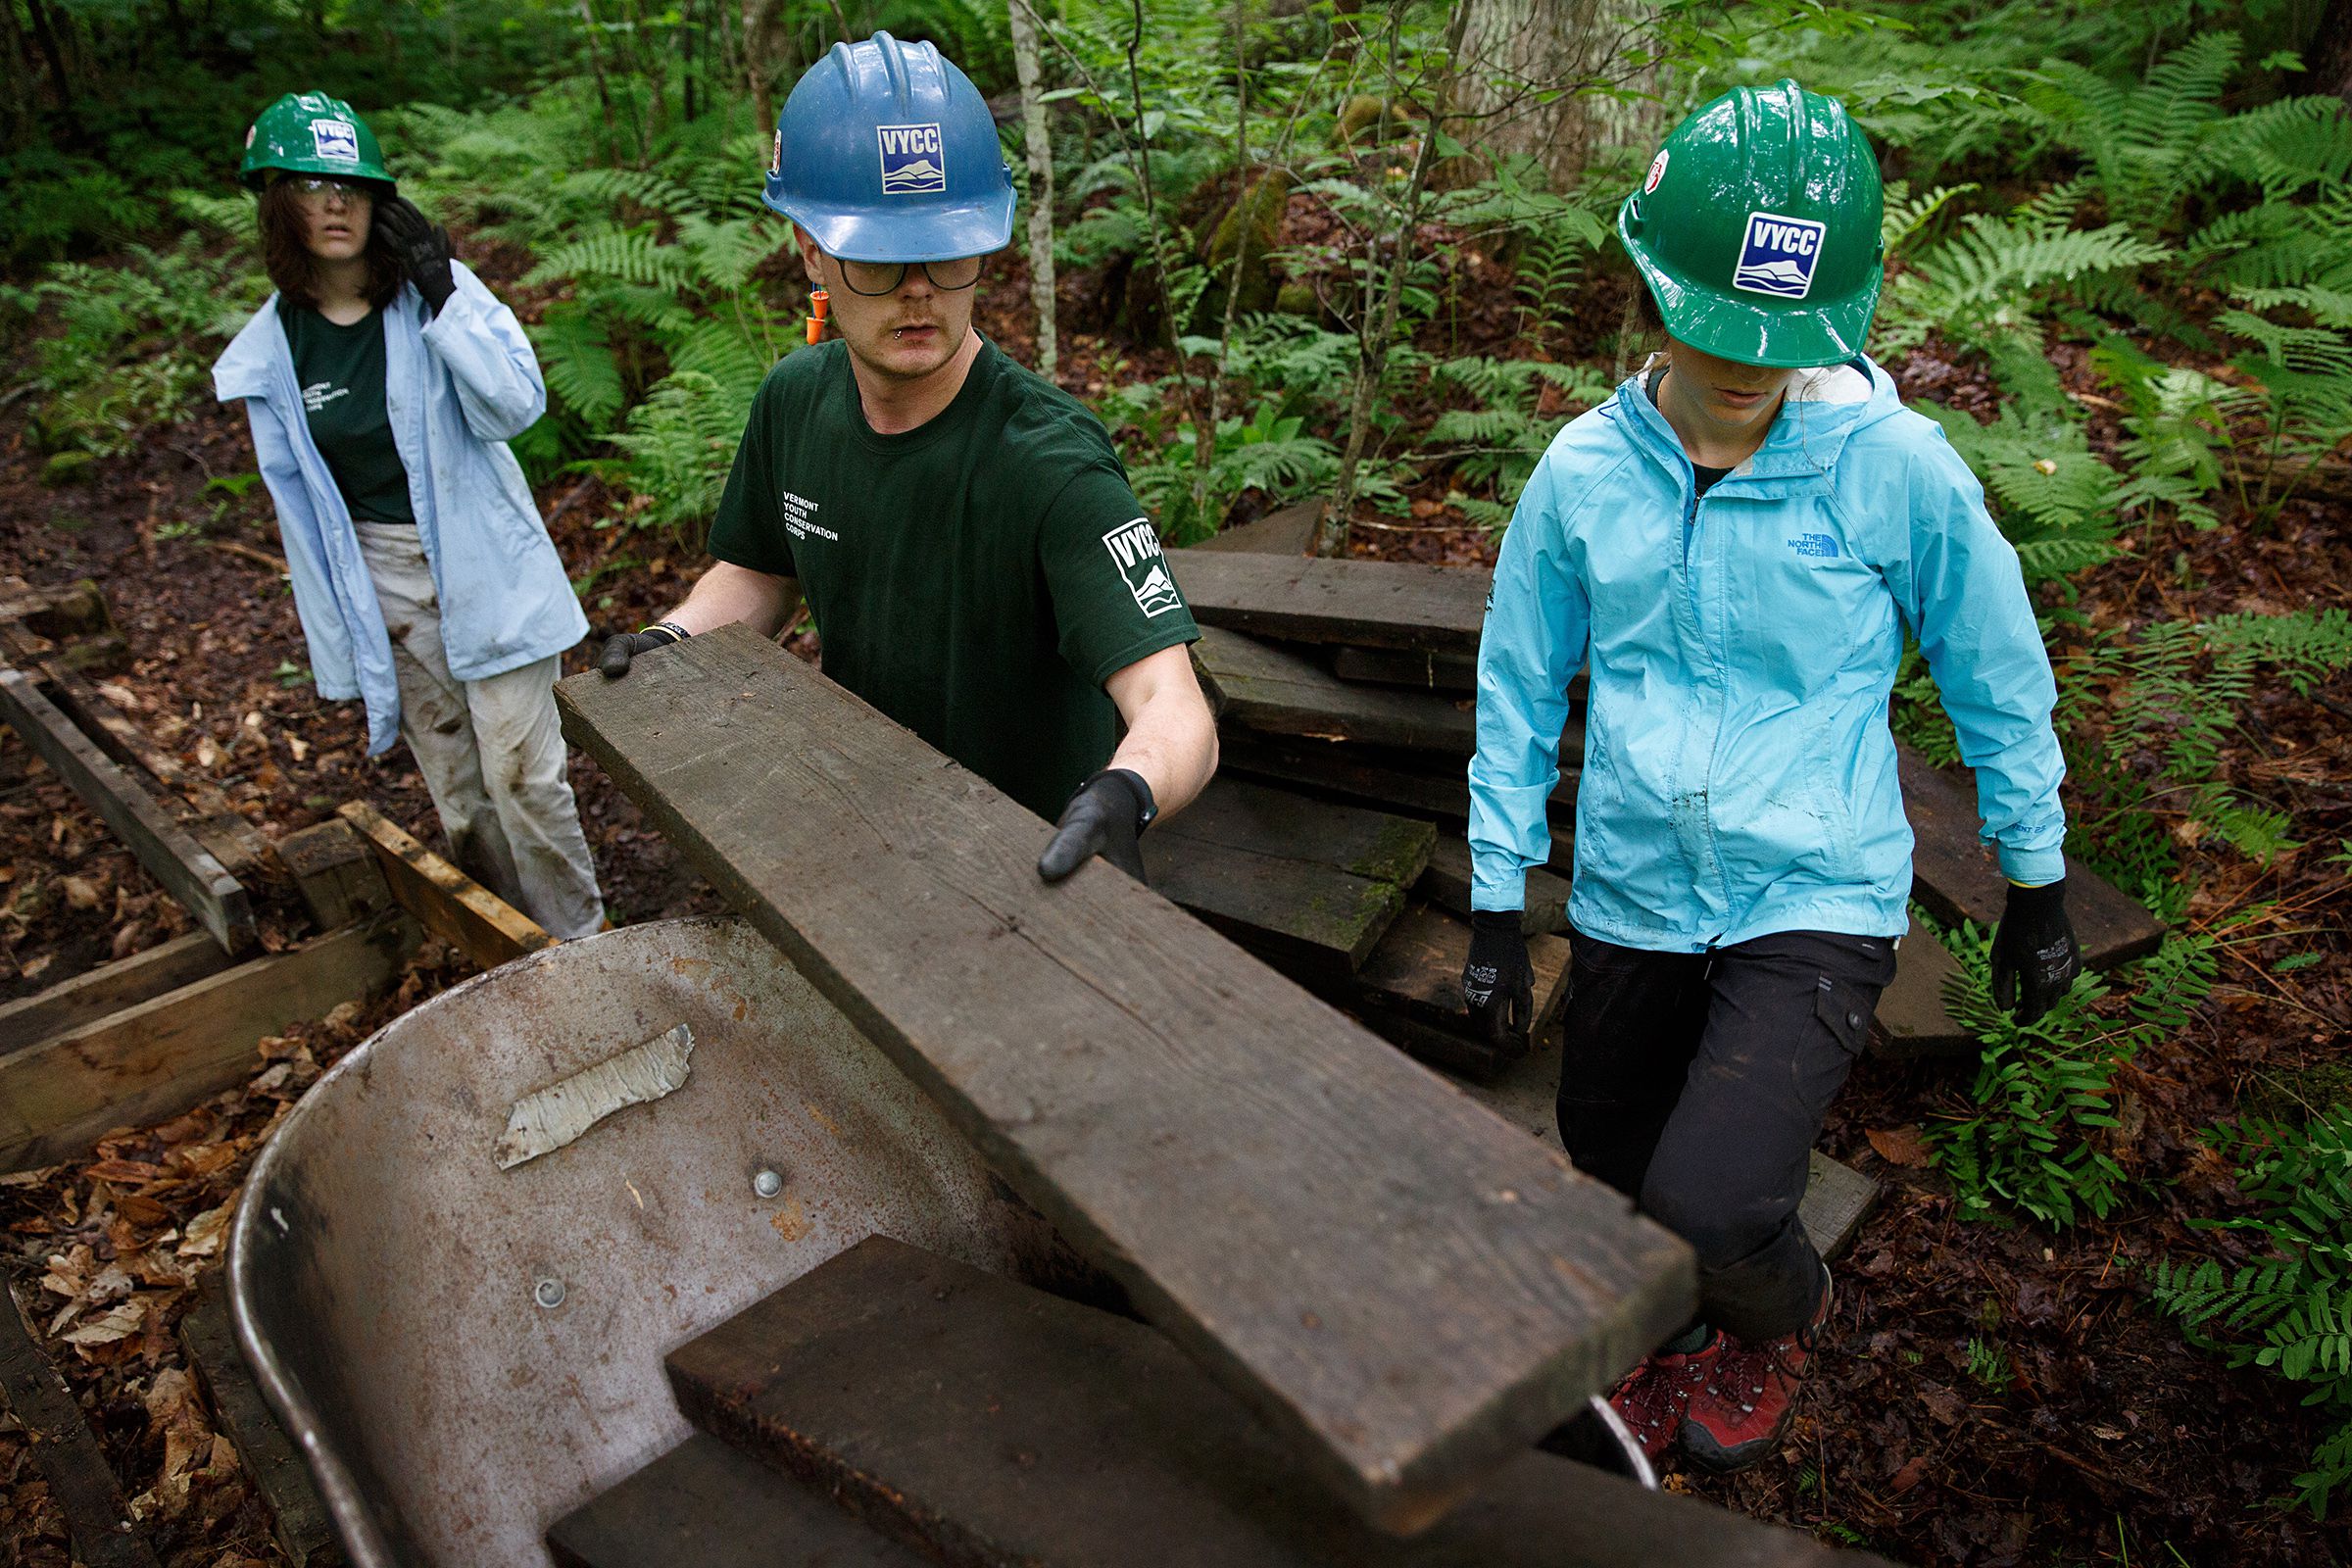 From left, Beatrix Garza, 15, of Woodstock, Vt., conservation crew leader Sawyer Connolly, of Enfield, N.H., and Chloe Masillo, 15, of Pittsfield, Vt., with Vermont Youth Conservation Corps replace a footbridge near the Prosper Trail trailhead at Marsh-Billings-Rockefeller National Historic Park in Woodstock, Vt., on Tuesday, June 22, 2021. The crew is tearing out the decaying boards and replacing them with pressure-treated wood. (Valley News / Report For America - Alex Driehaus) Copyright Valley News. May not be reprinted or used online without permission. Send requests to permission@vnews.com.